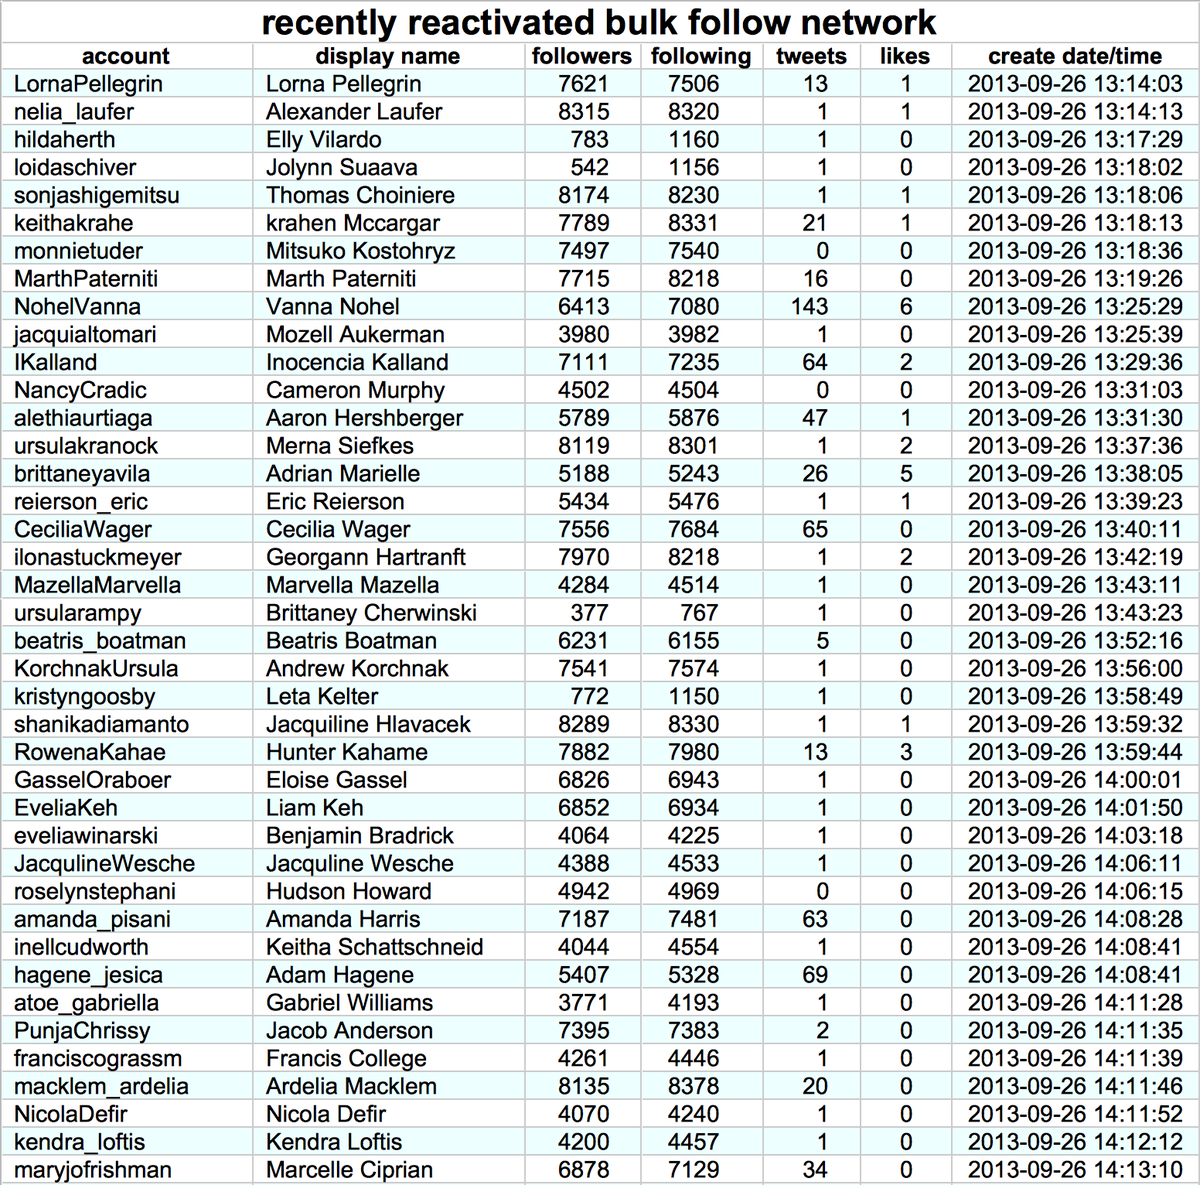 By exploring the follower networks of those 31 accounts, we found a group of 119 accounts that we believe to be part of a bulk follow network, all created on September 26th 2013. These accounts were dormant from late 2013 until mid-2020, but are now tweeting and following again.